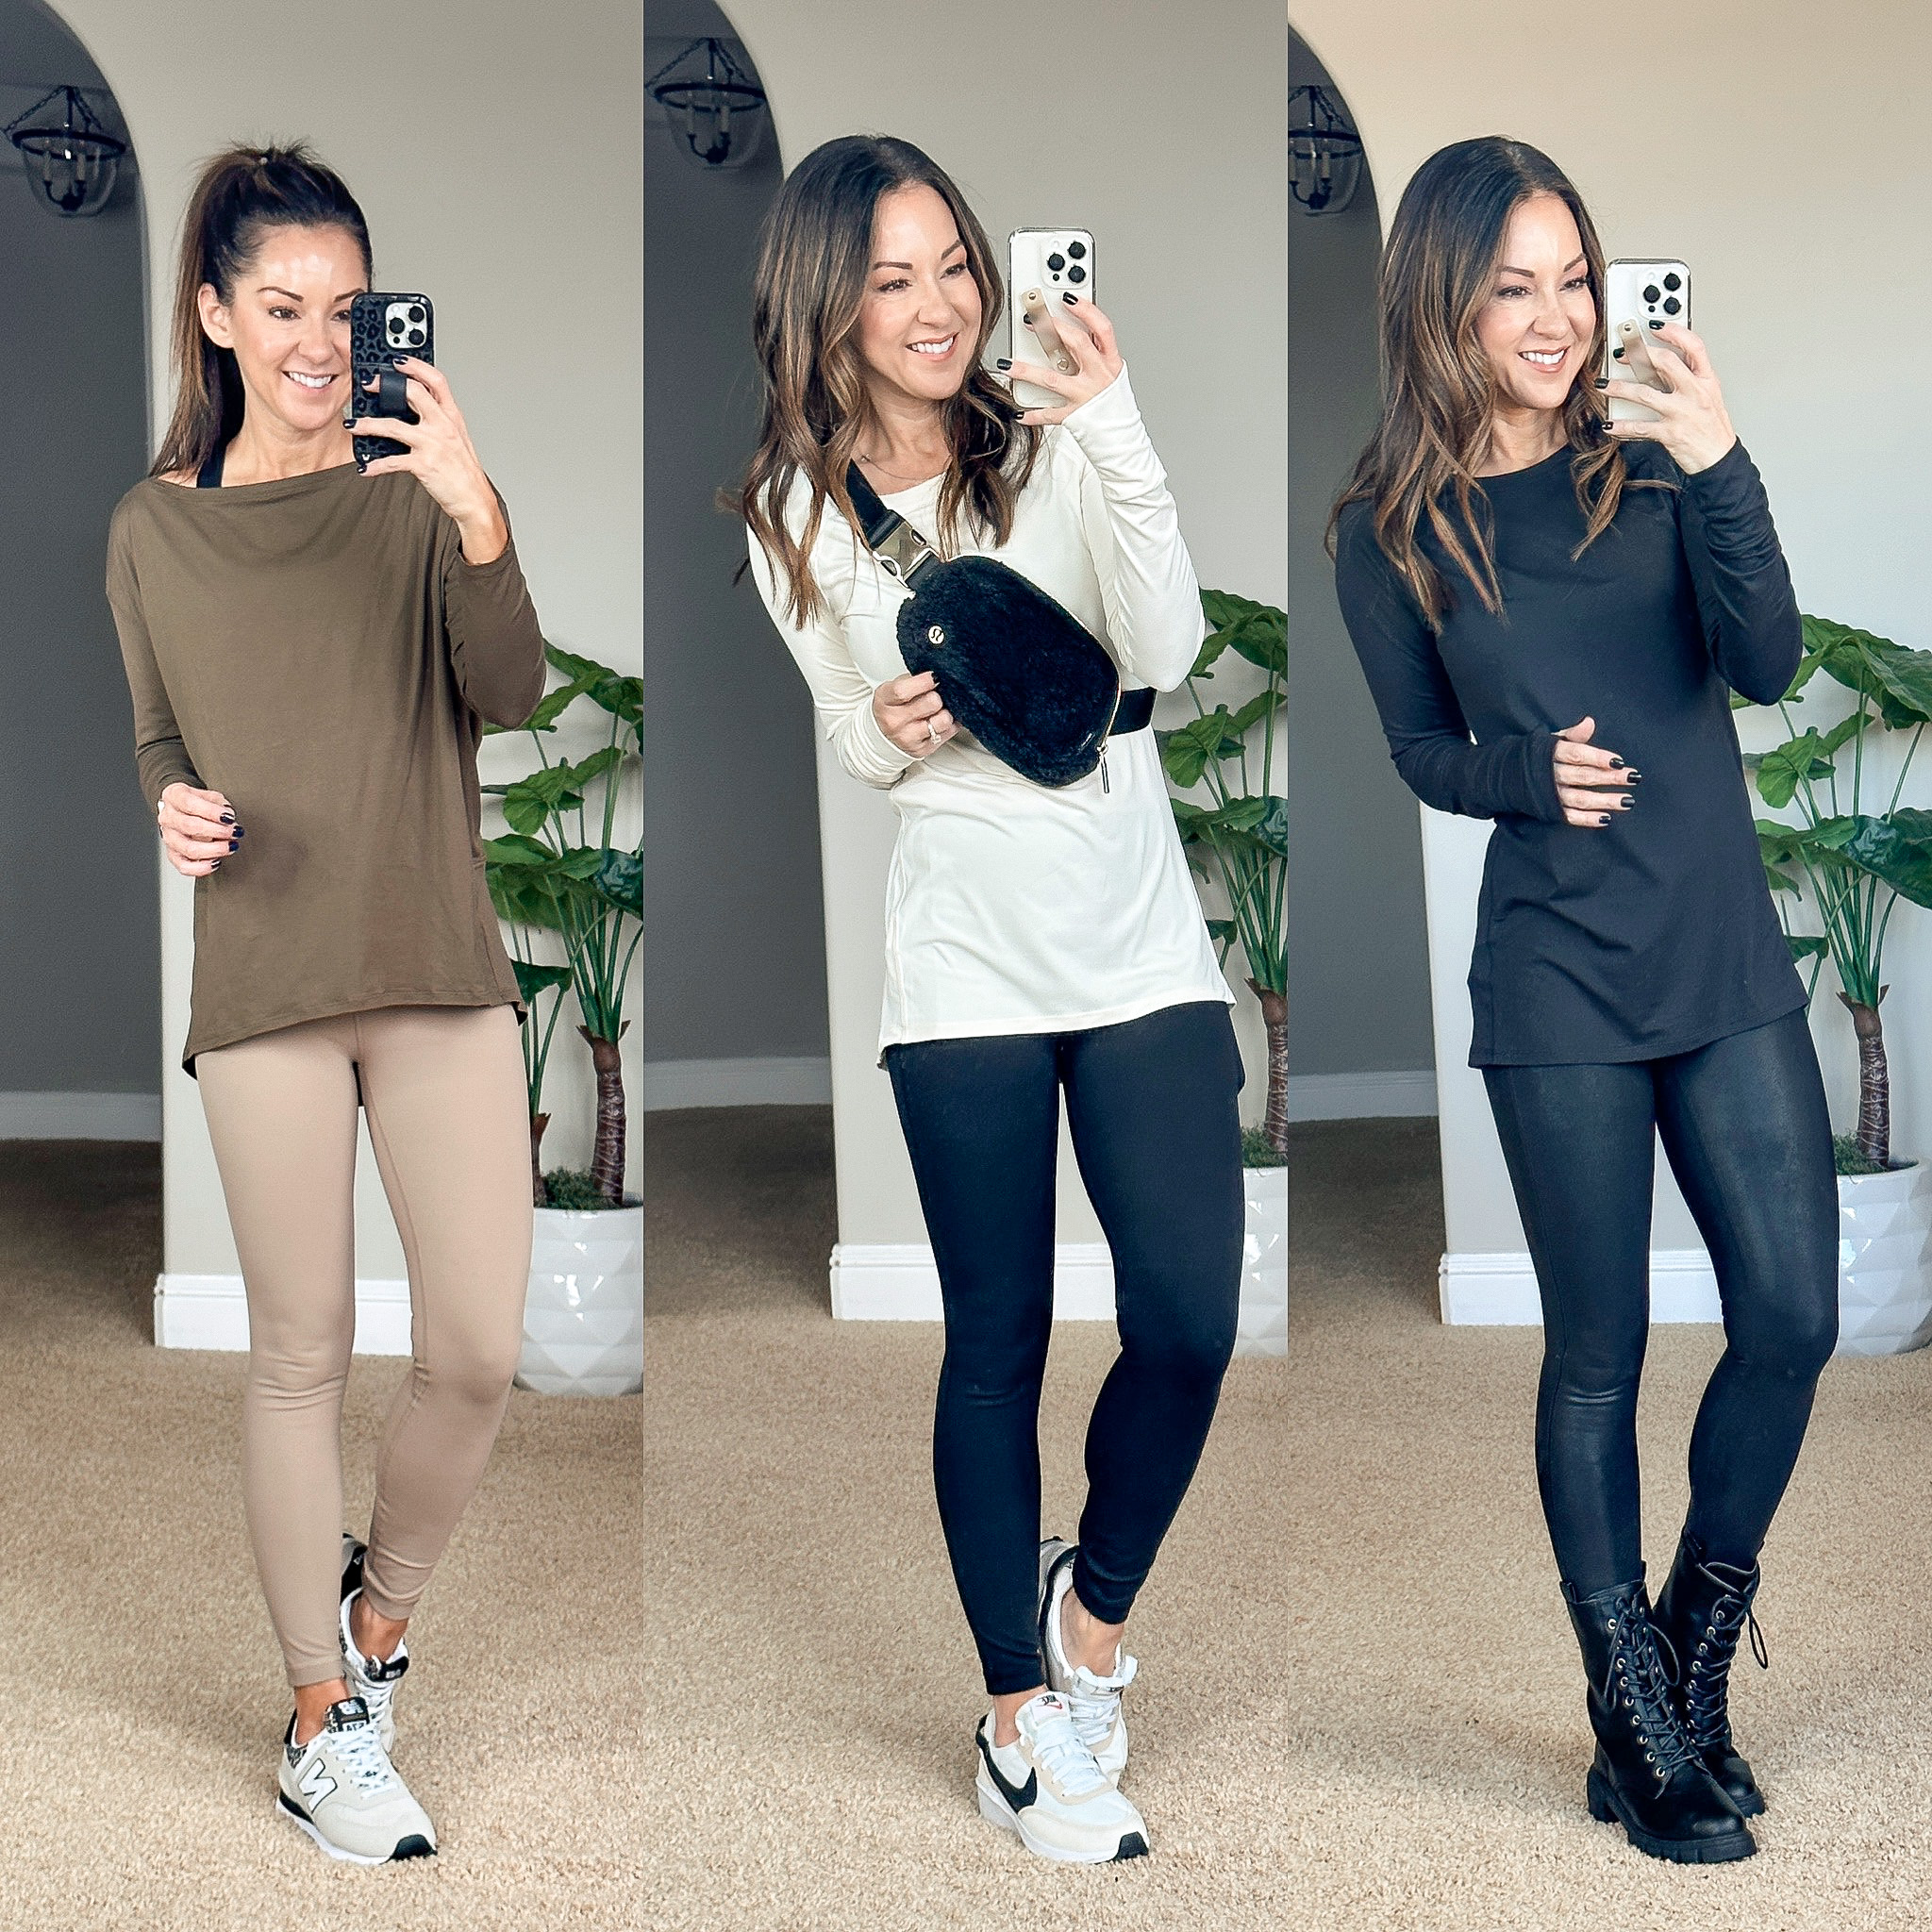 top 22 picks, athletic wear, fashion, style, athletic tops, athletic leggings, athleisure wear 